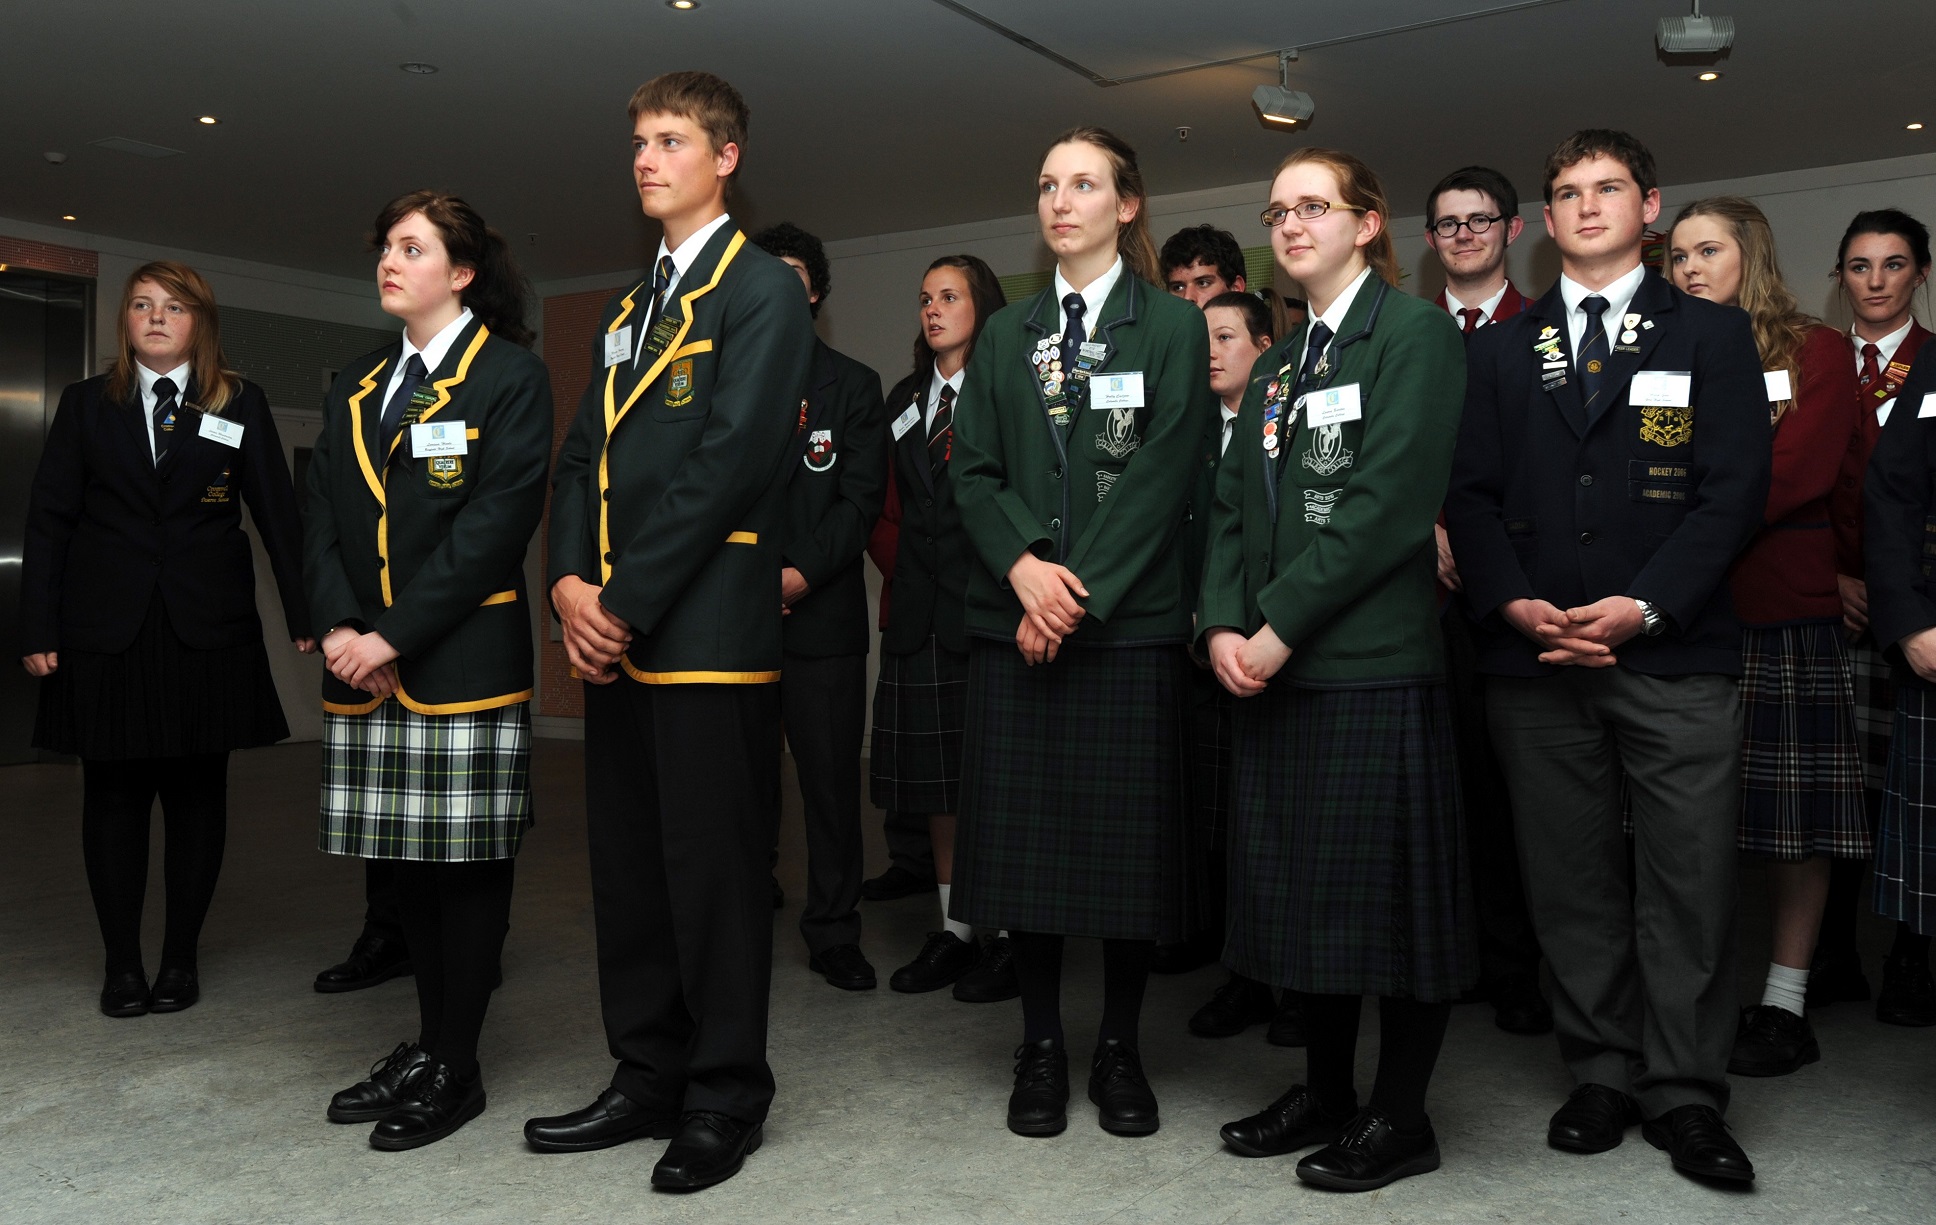 Class Act 2012 recipients listen to the Prime Minister's speech during the Class Act 2012 event...